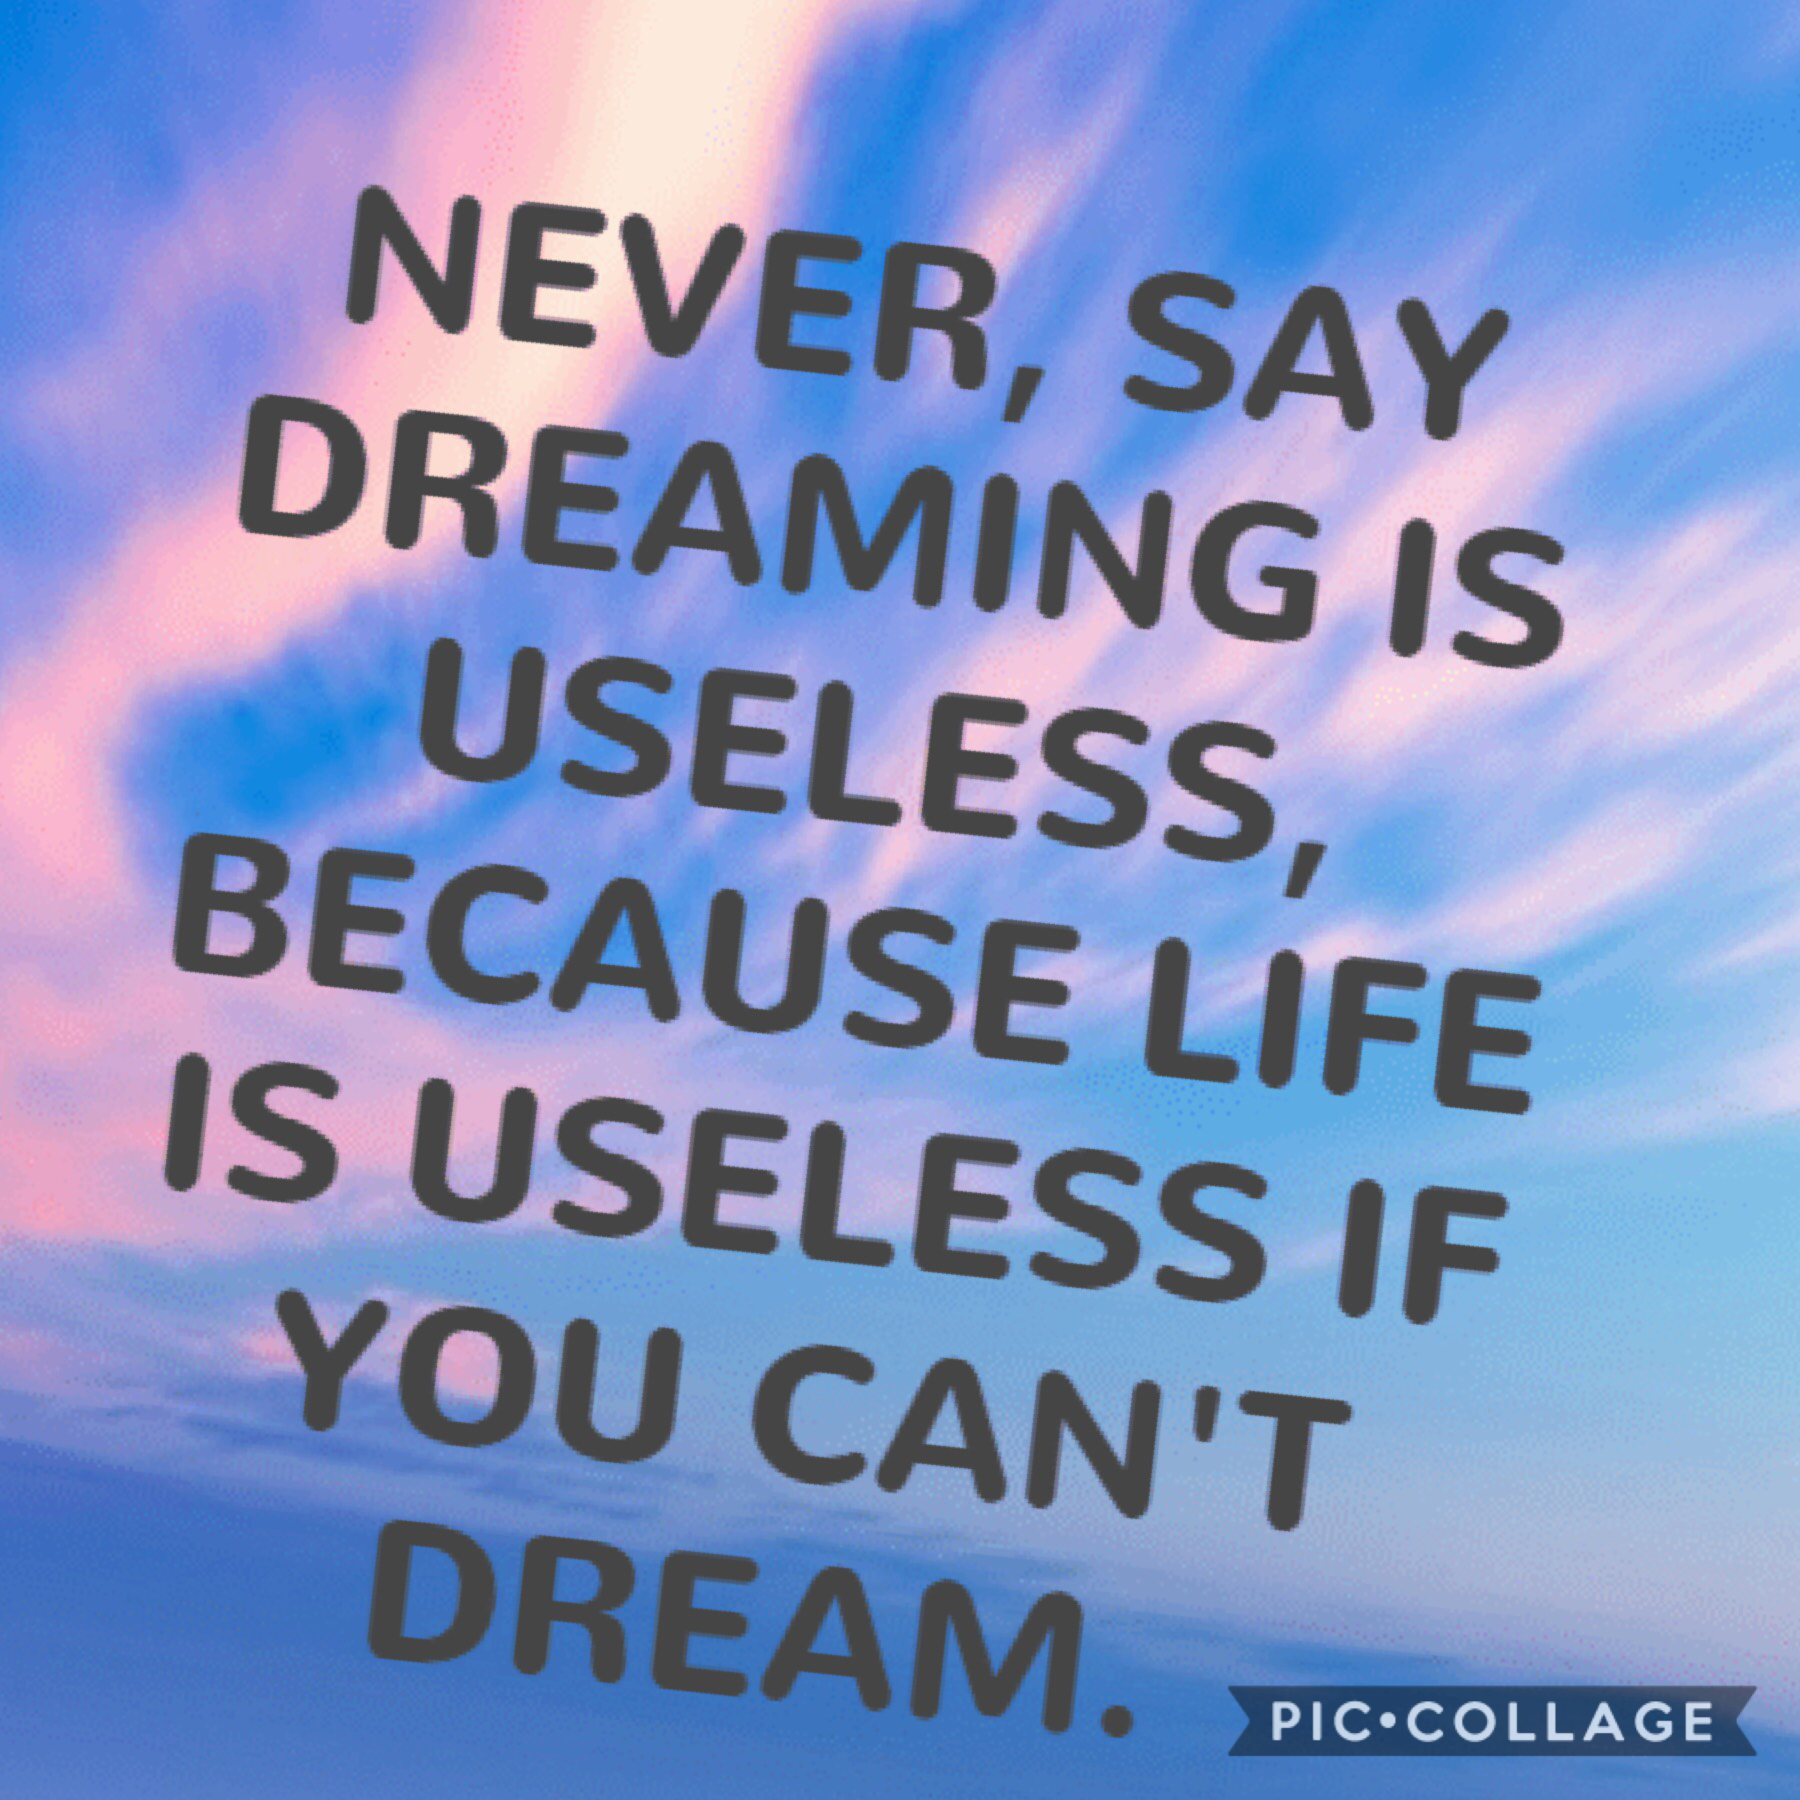 Stay dreaming 